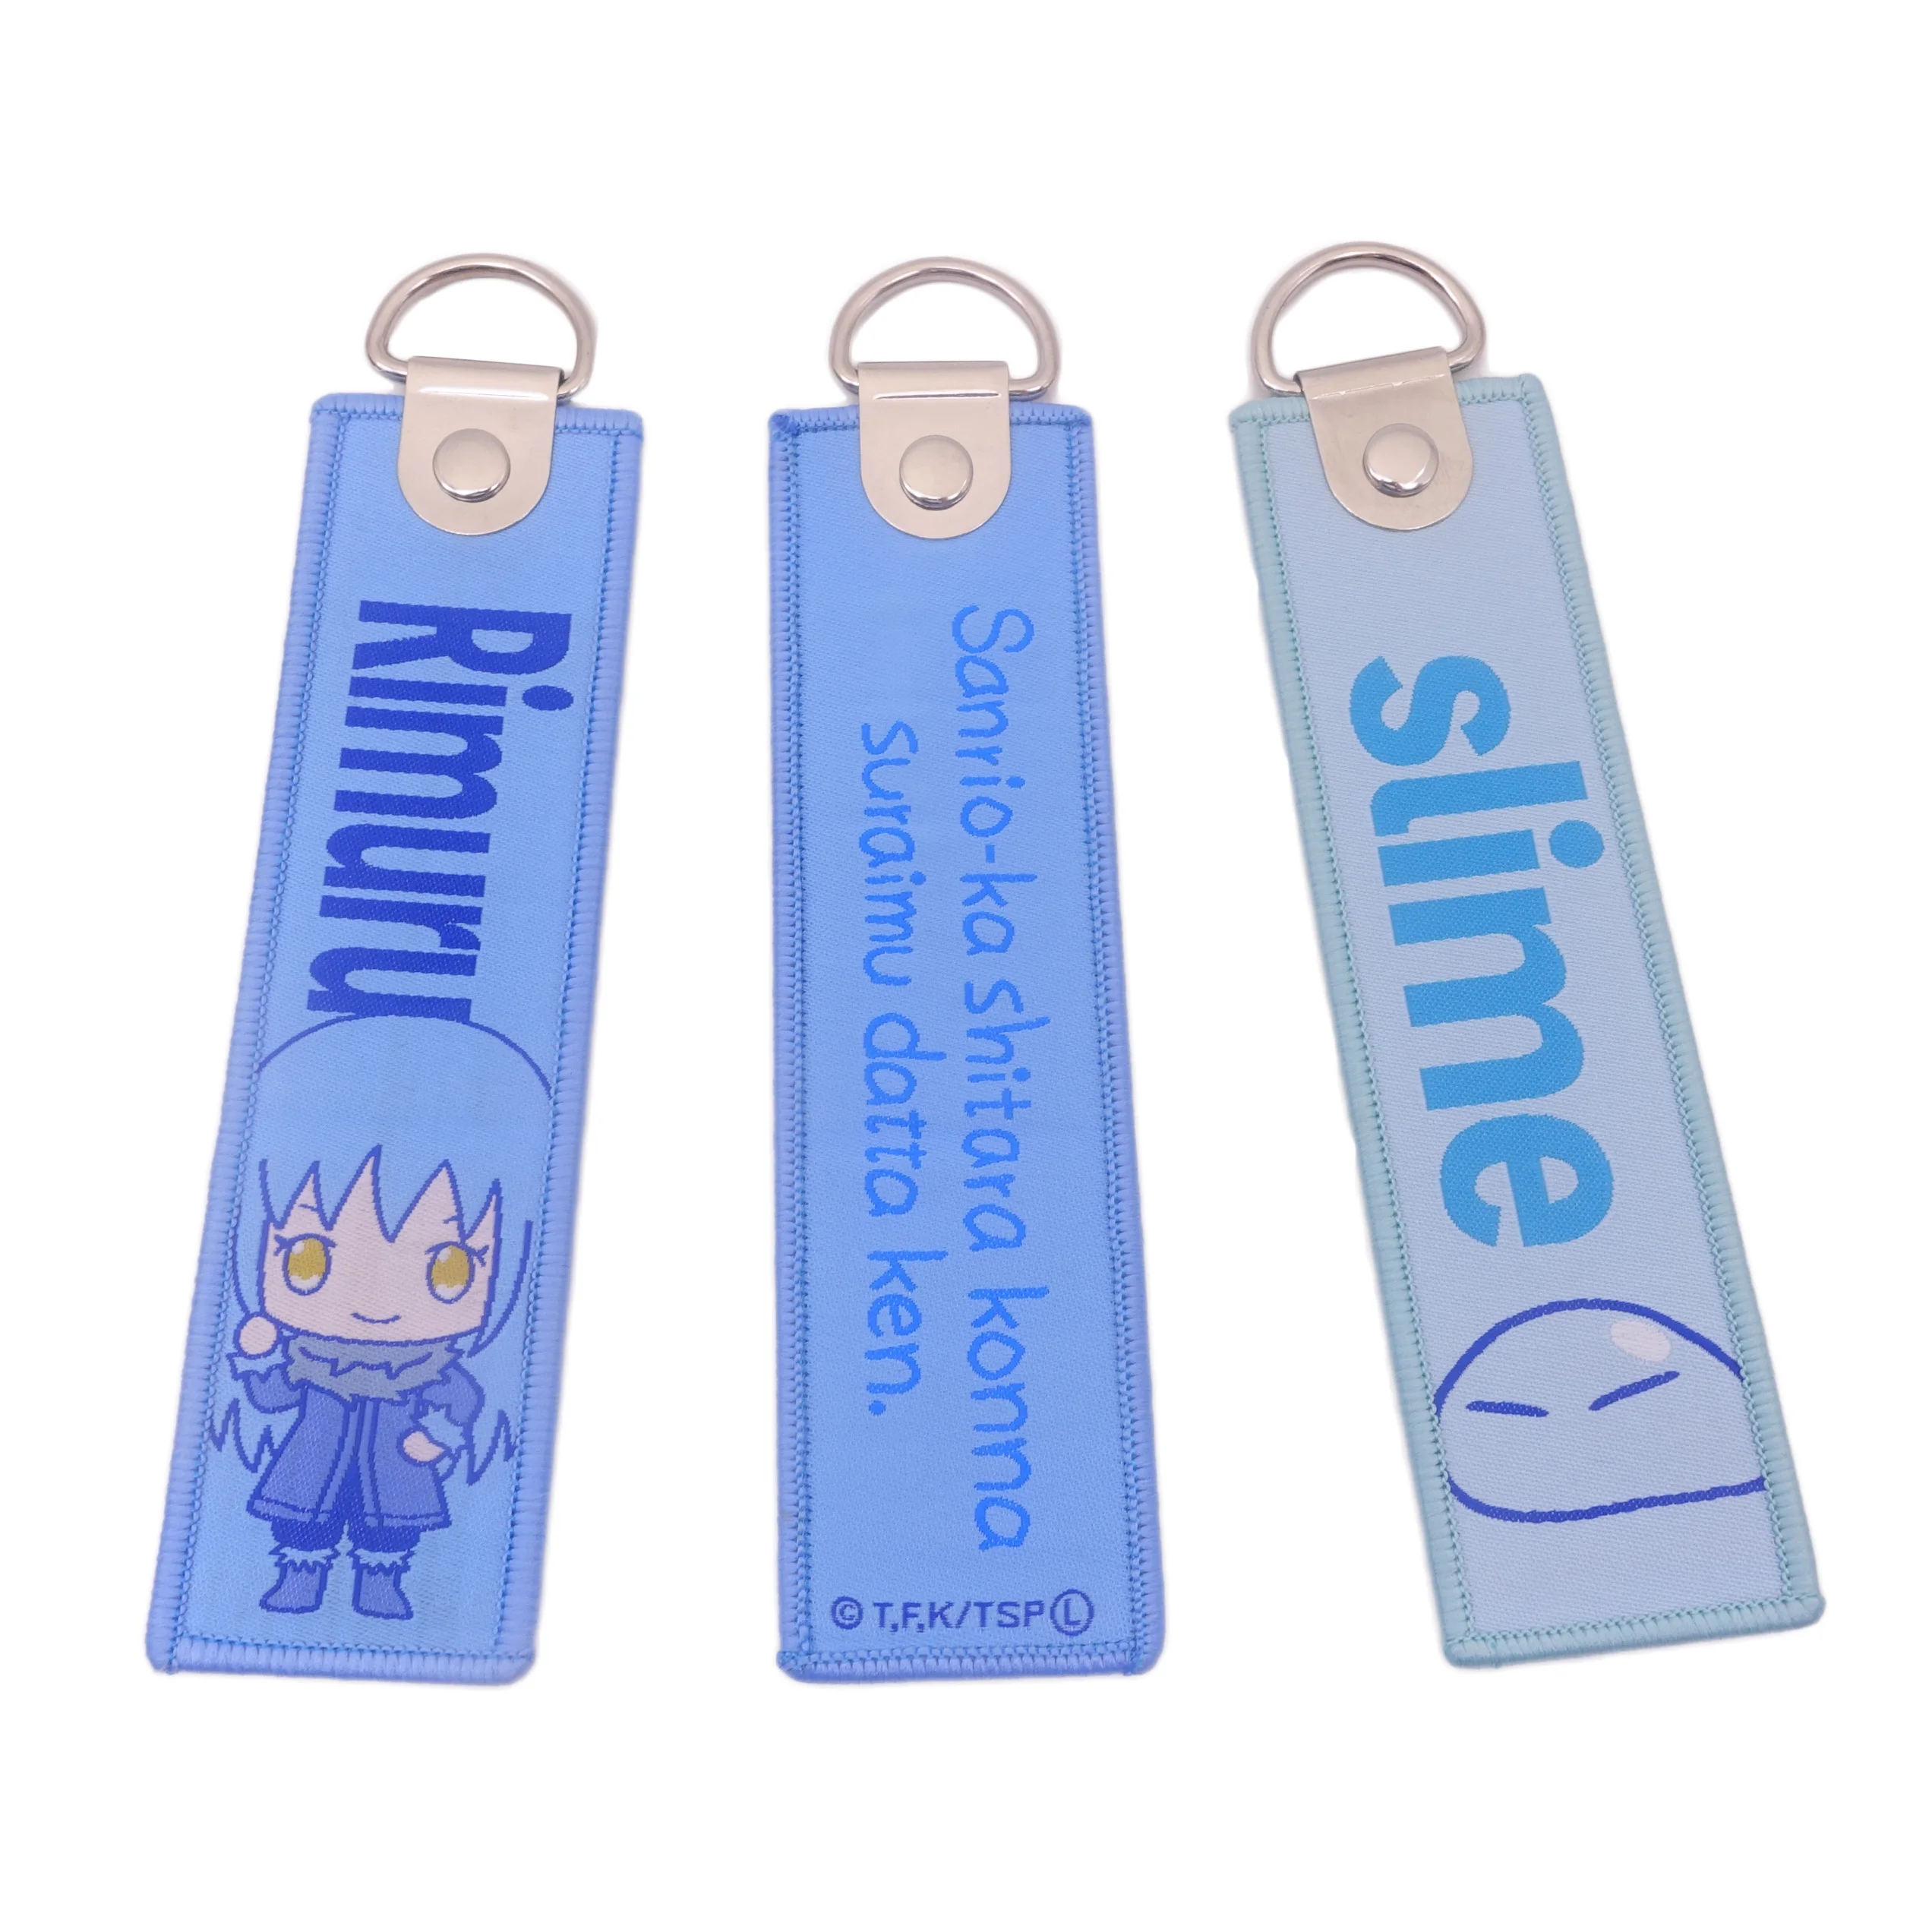 Custom Made Fabric Woven Embroidery Key Chains Key Rings Luggage Anime Jet Tags...